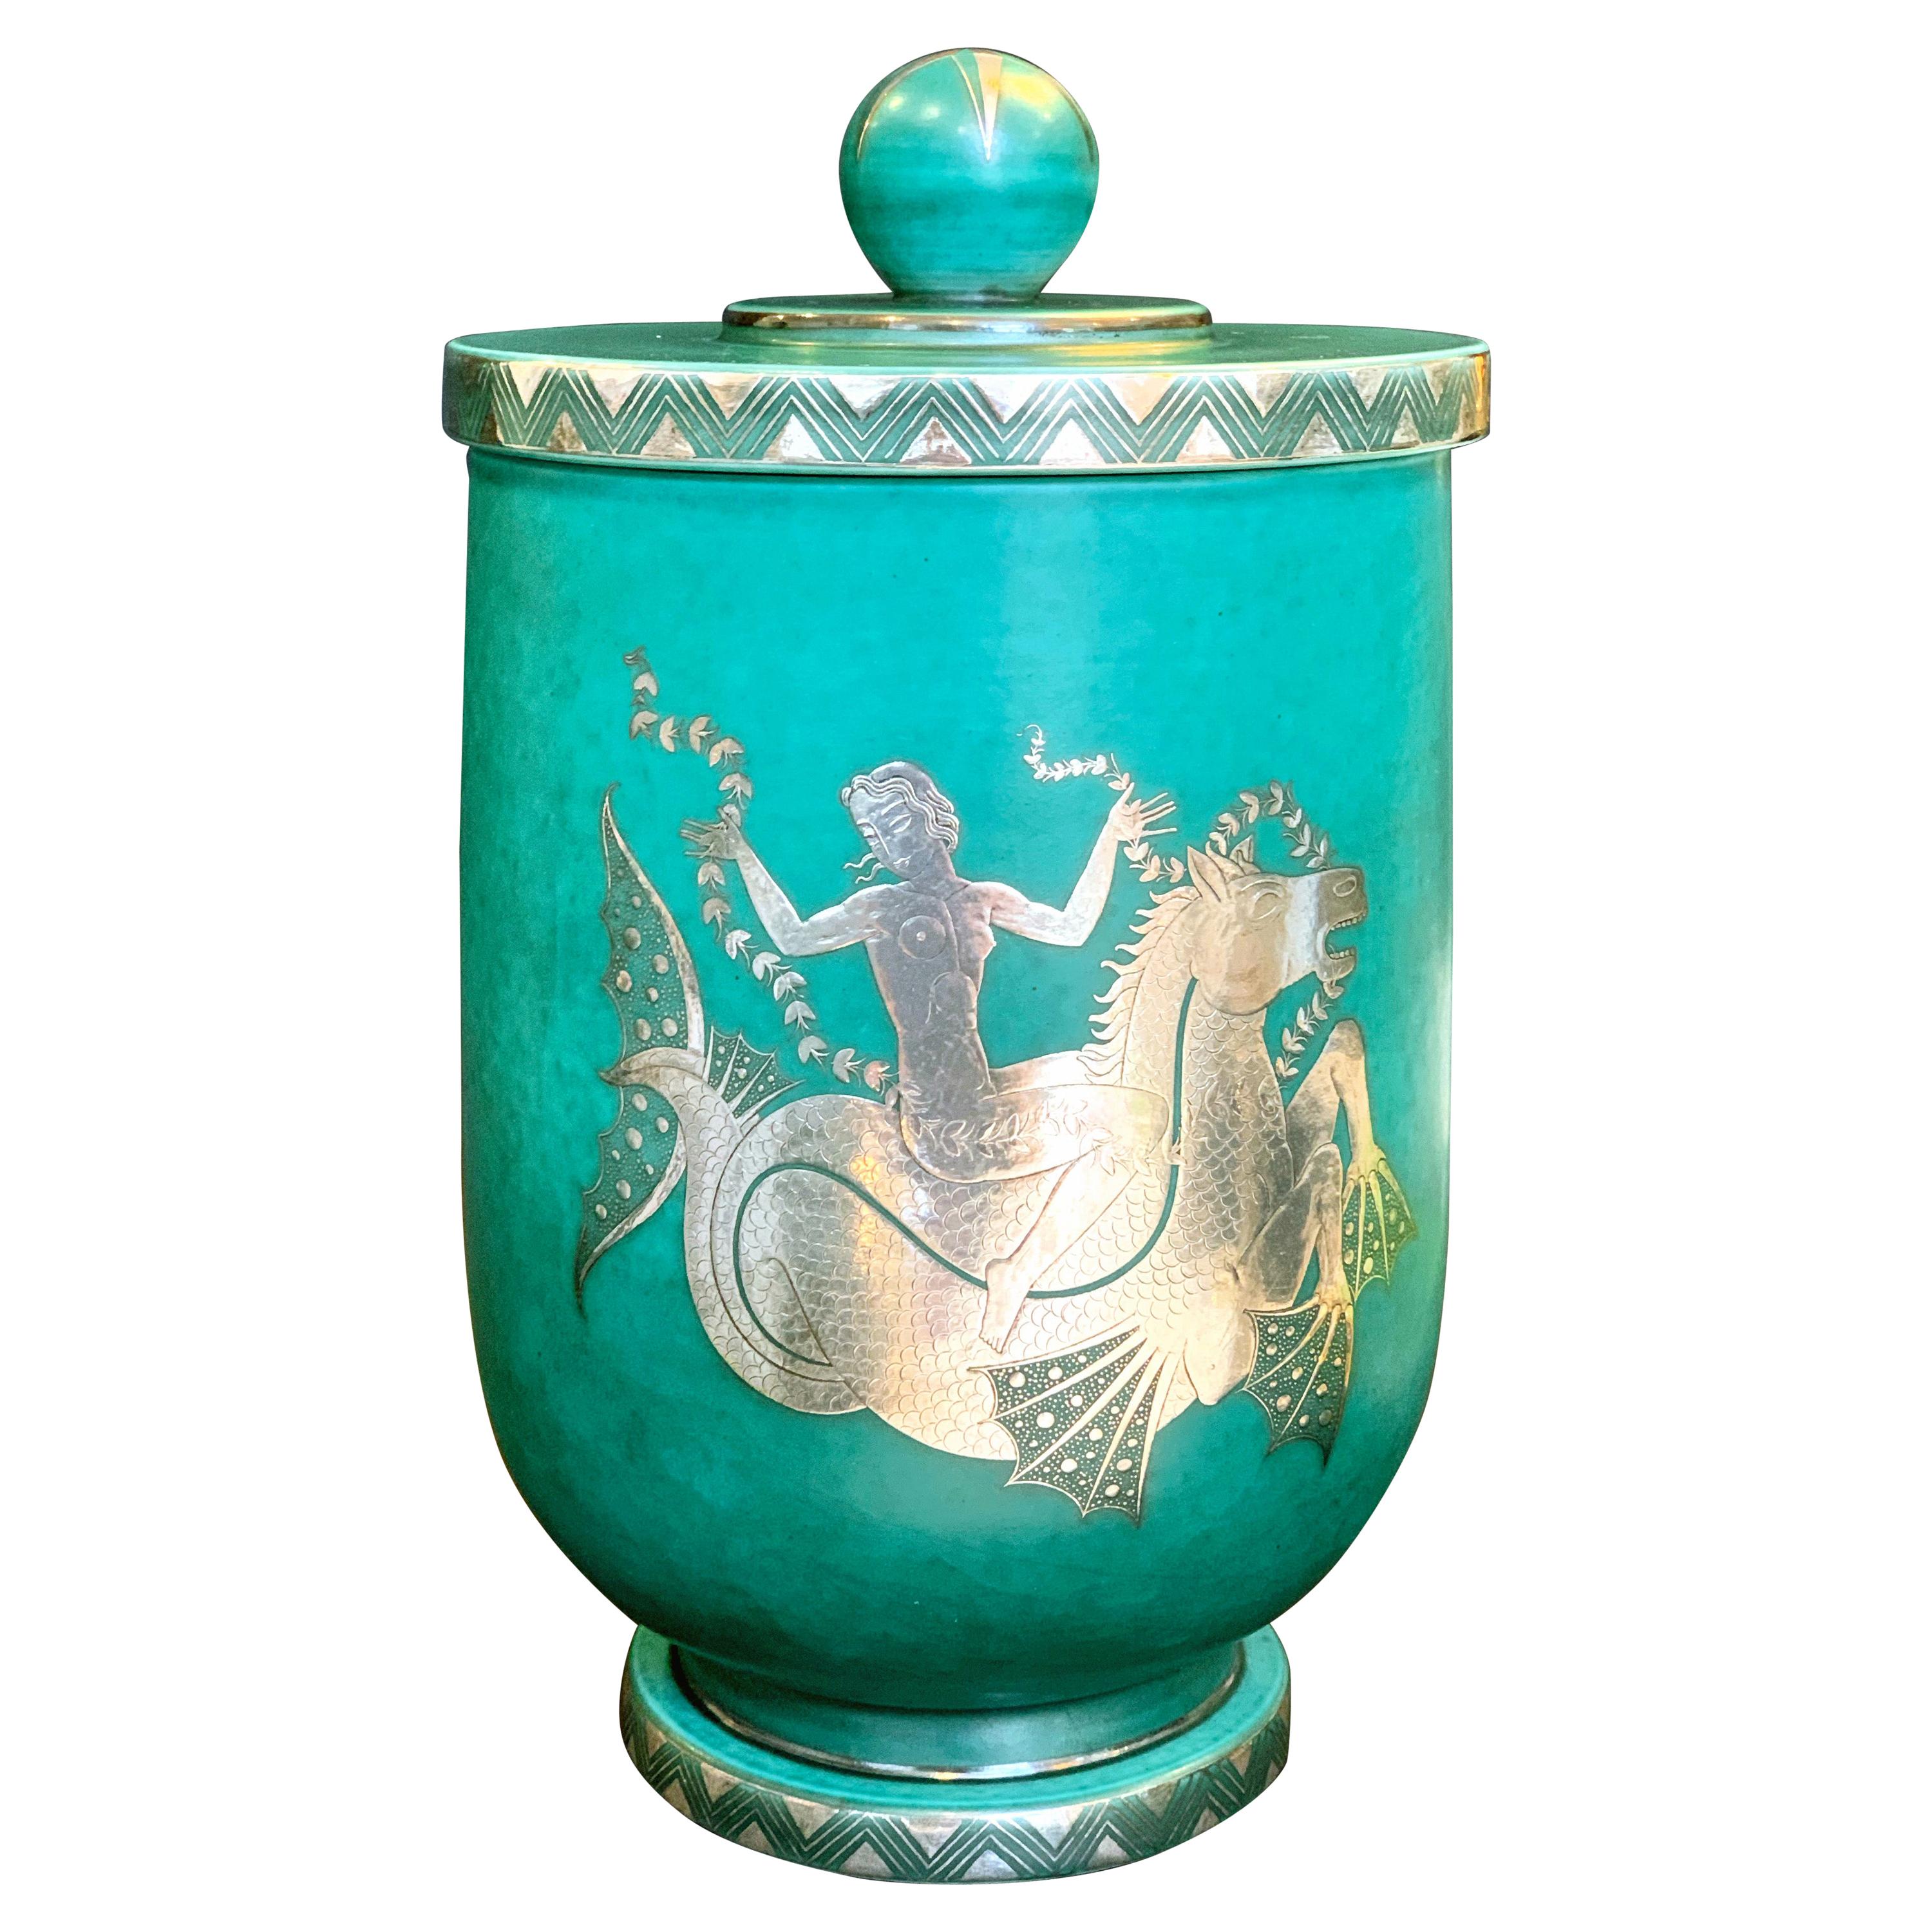 "Mermaid Riding Hippocampus, " Large, Unique Argenta Covered Jar by Gustavsberg For Sale